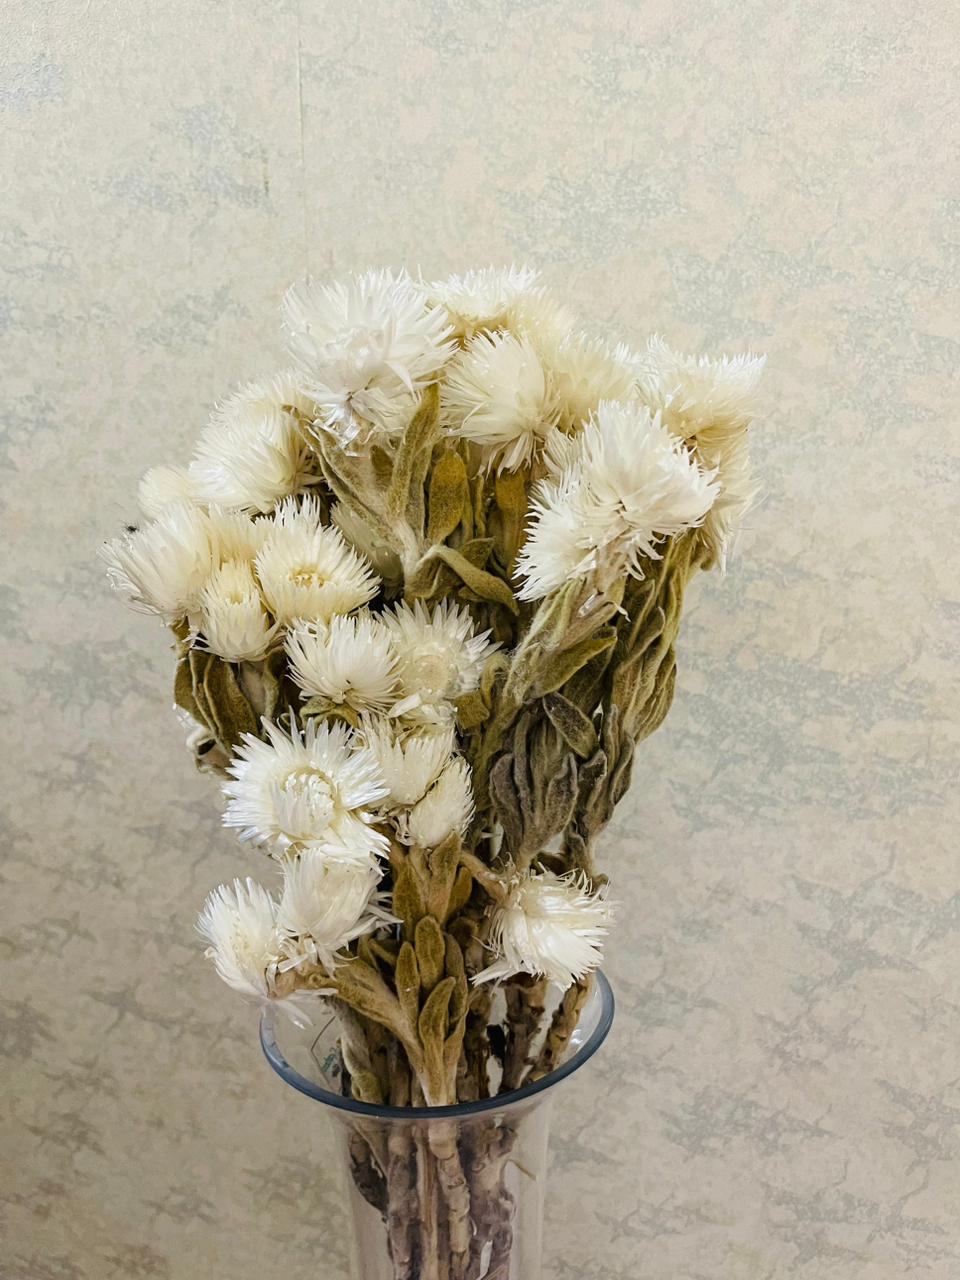 Natural dried helichrysum sprig